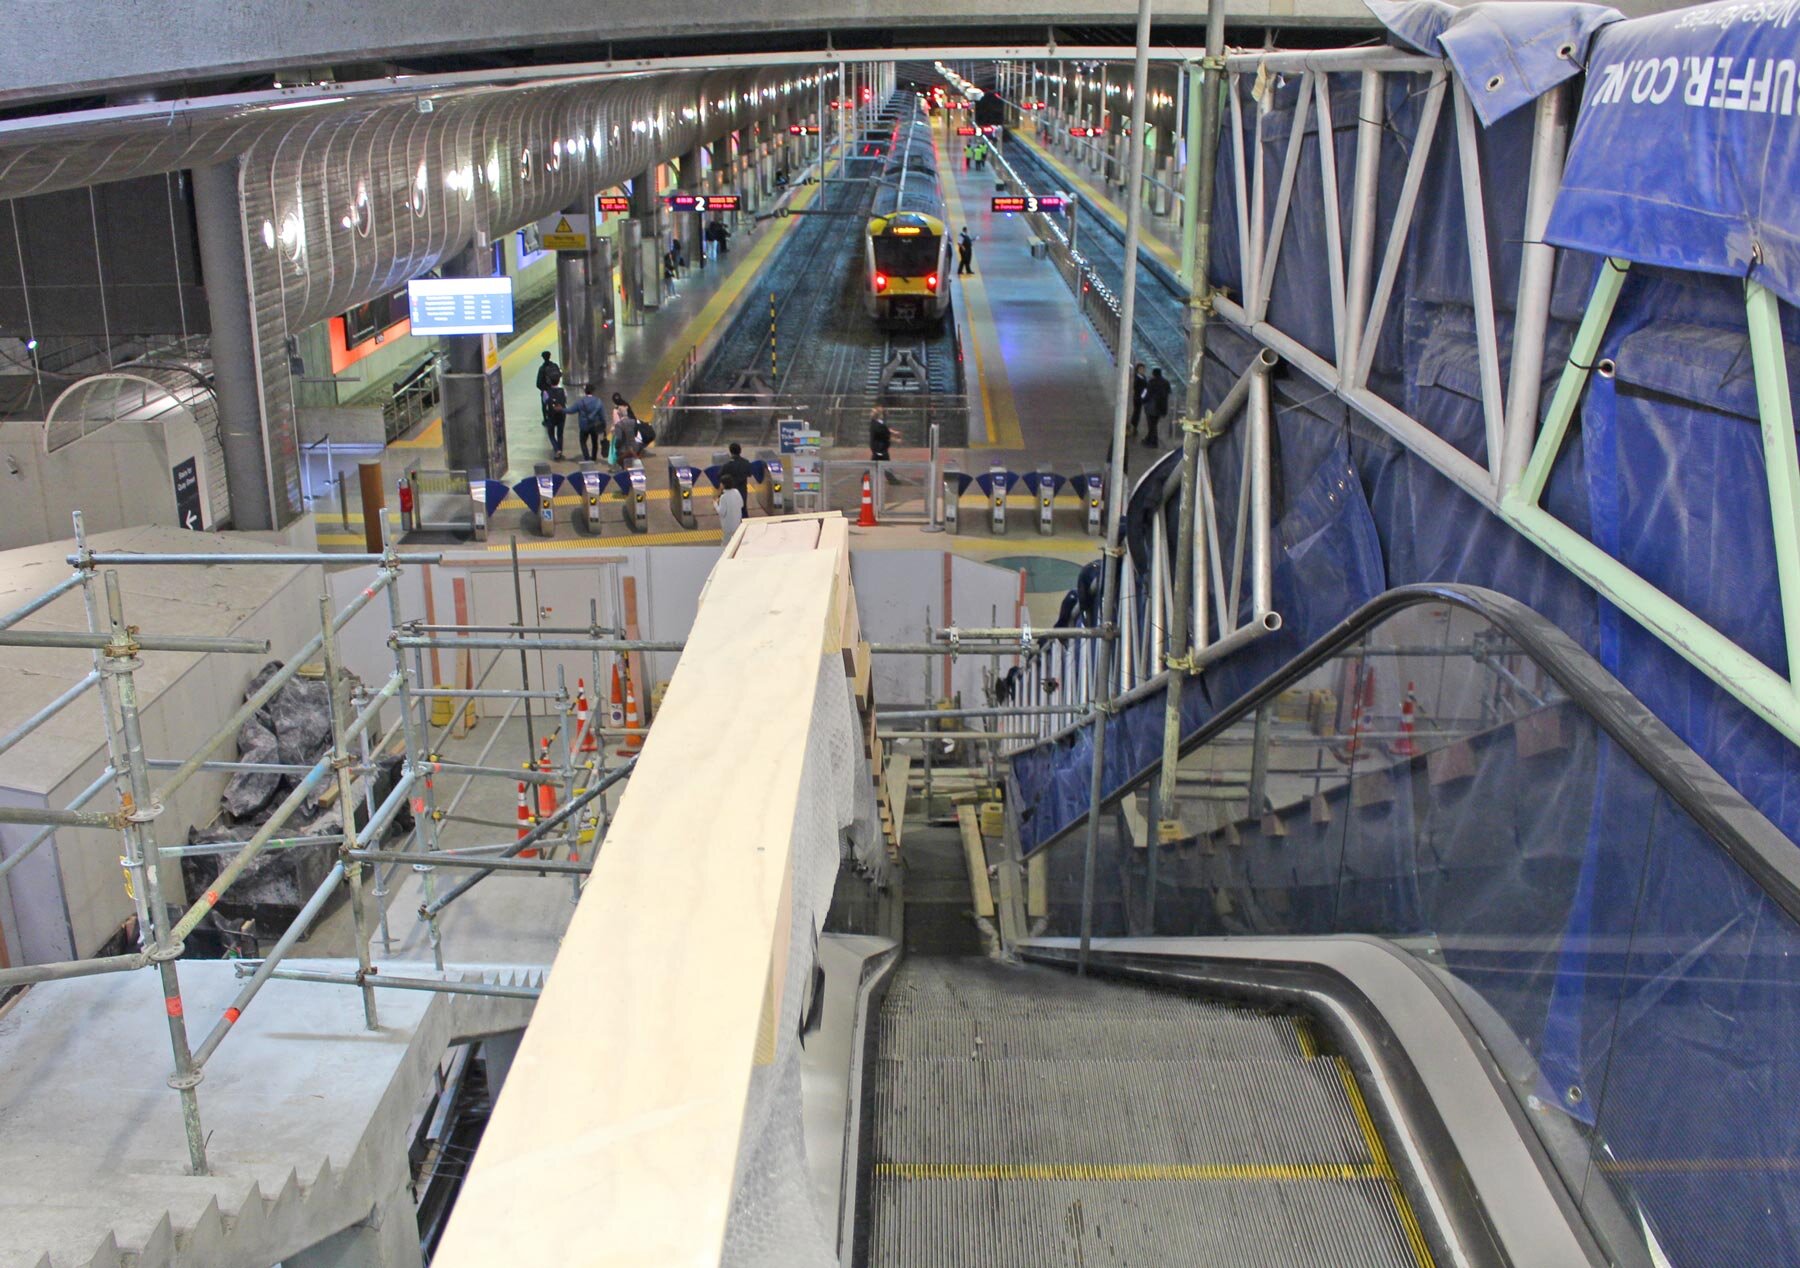   The new metro-grade escalators will replace the old ones  